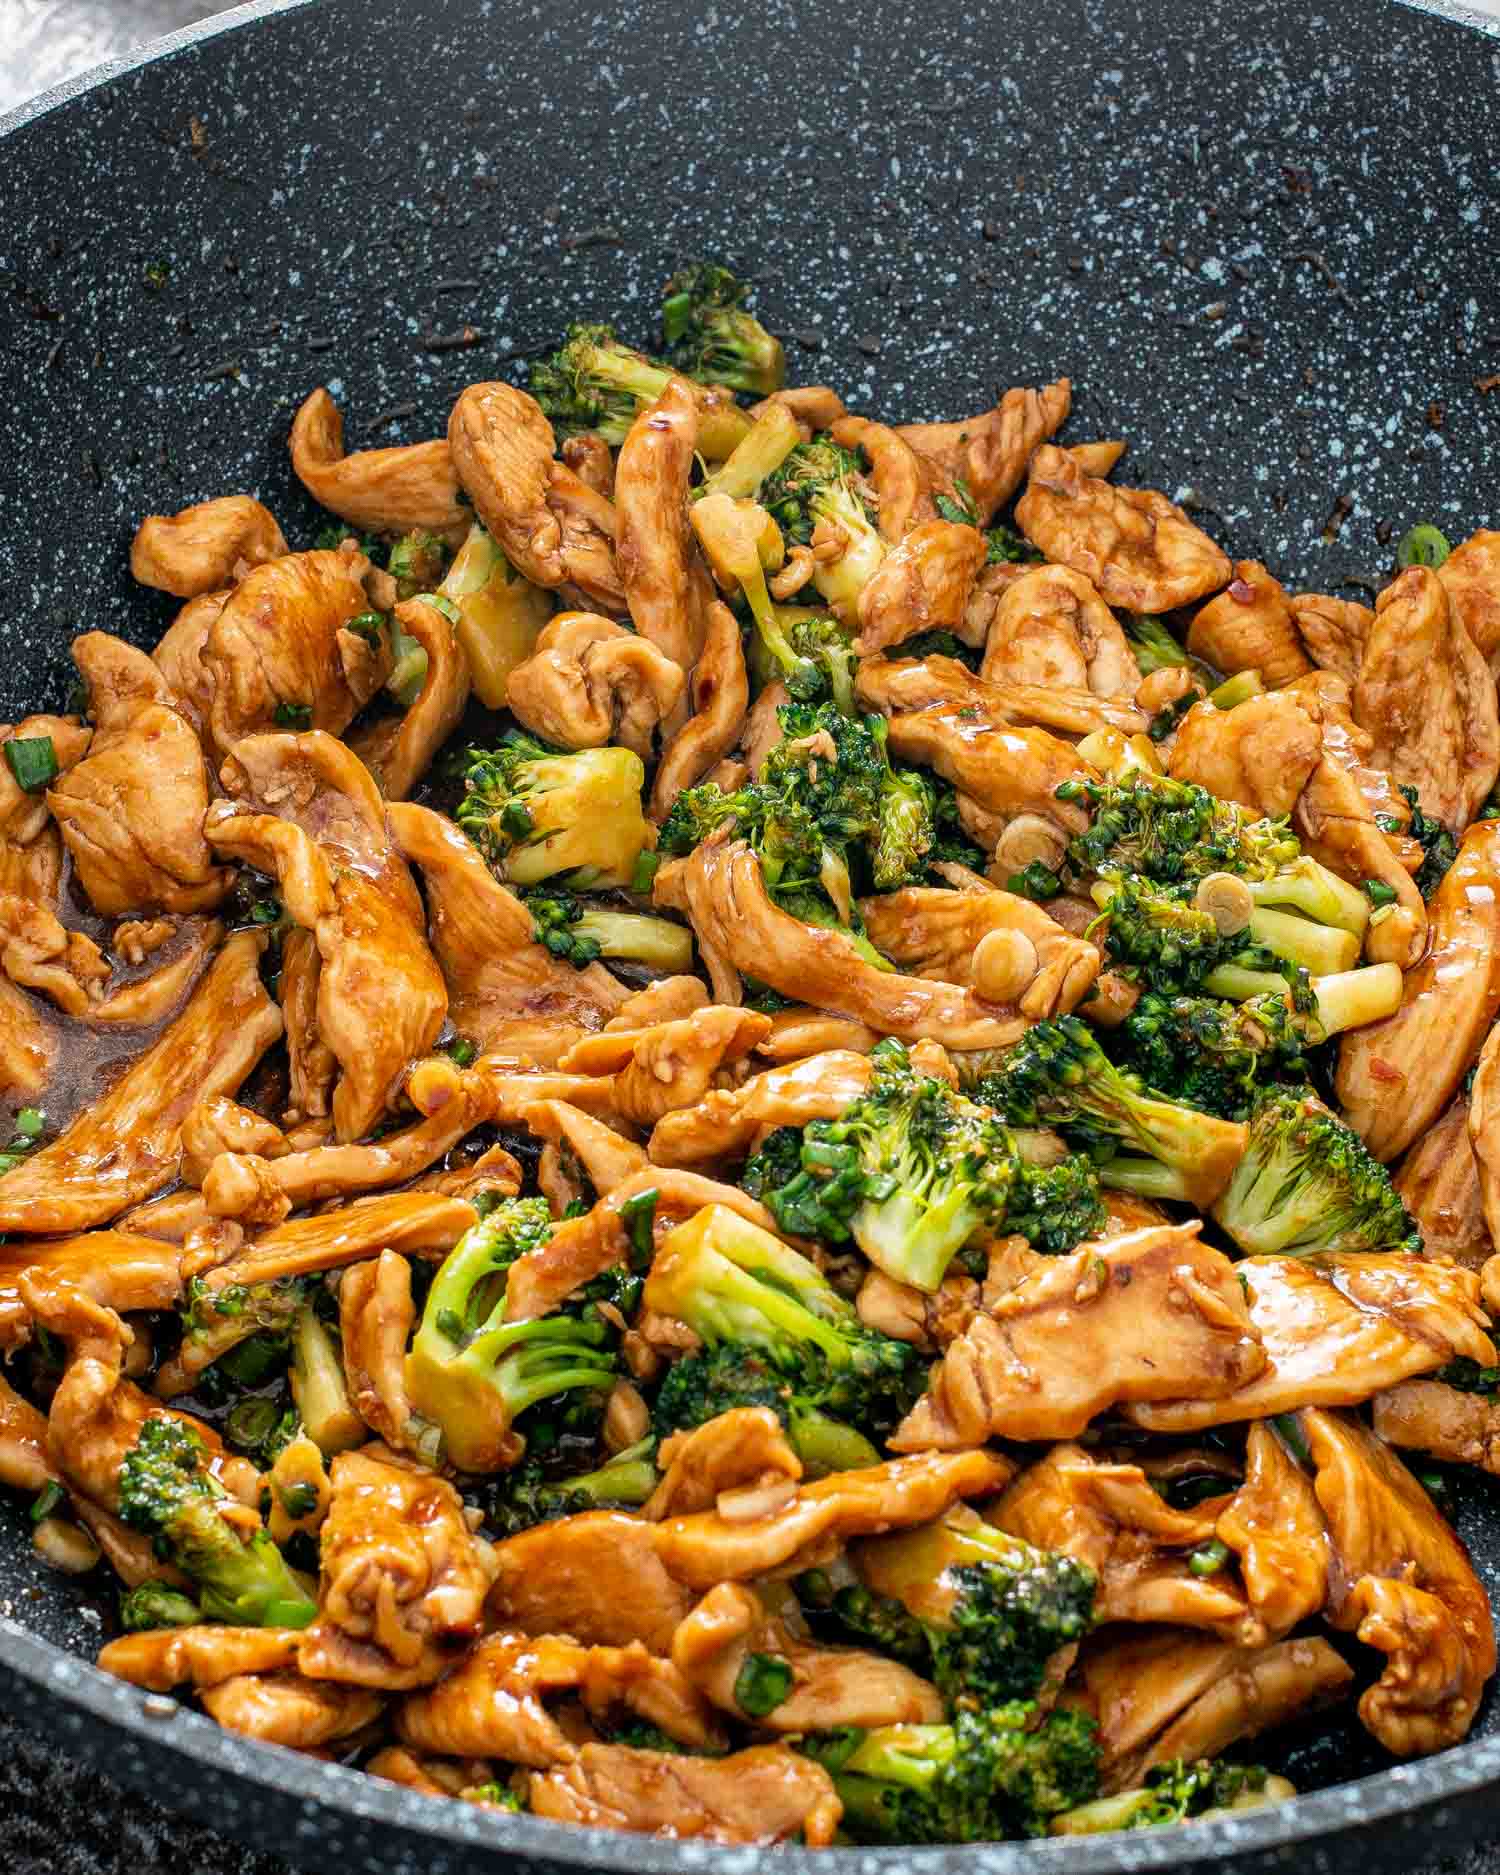 freshly made asian style chicken and broccoli in a wok.